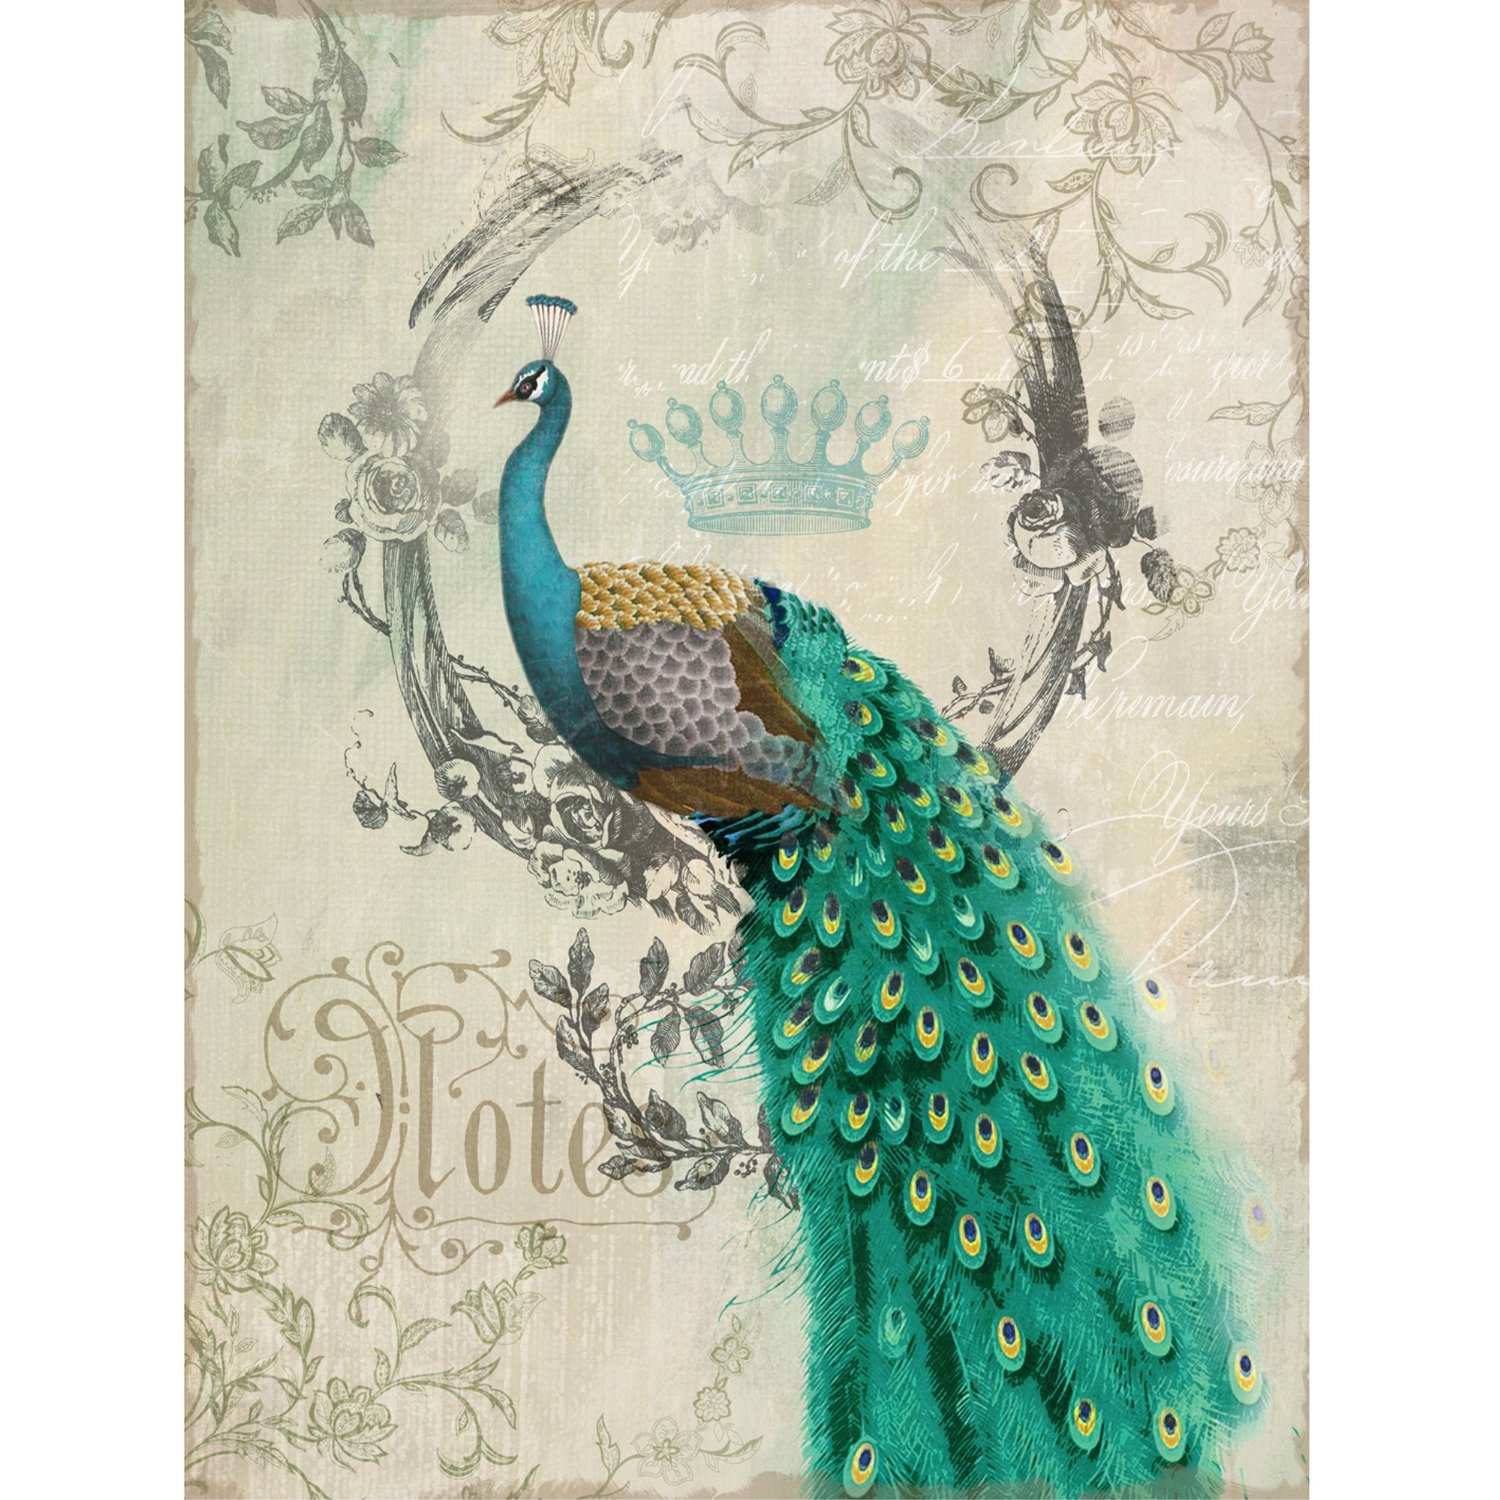 Free Peacock Images Art, Download Free Peacock Images Art png images